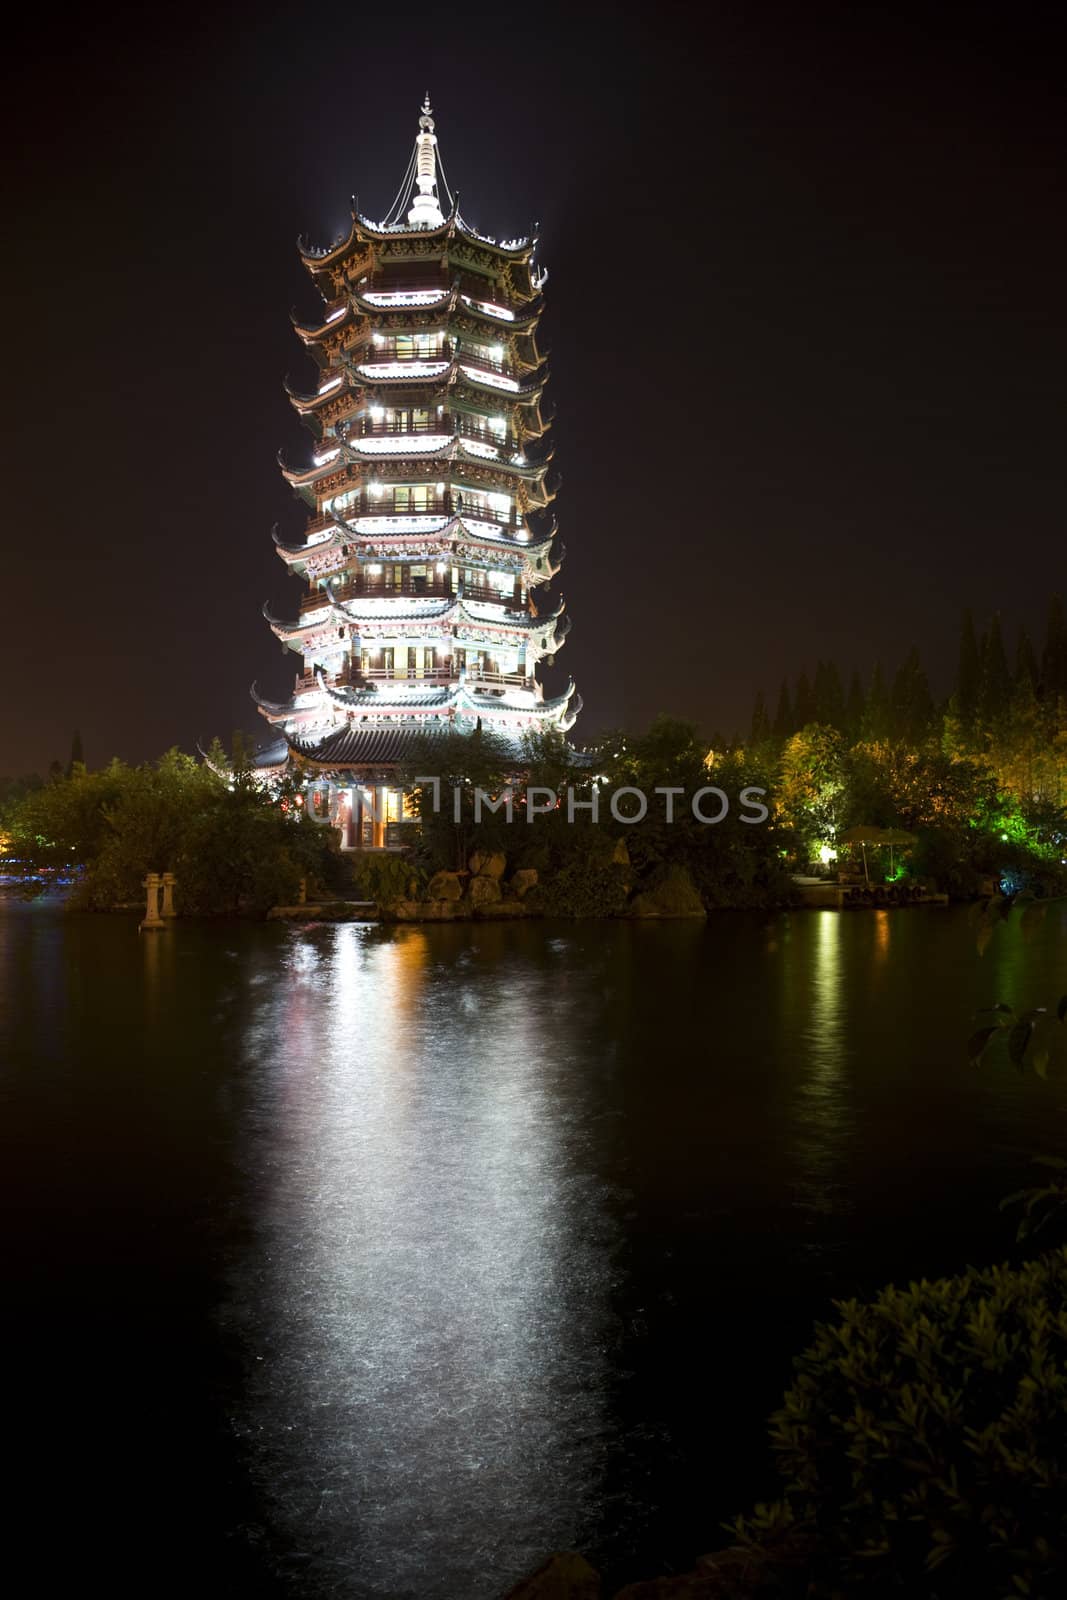 Night image of the Moon Pagoda at Guilin, China. This pagoda is one of the two pagodas located side by side which together are known as the Sun and Moon Pagodas of Guilin.